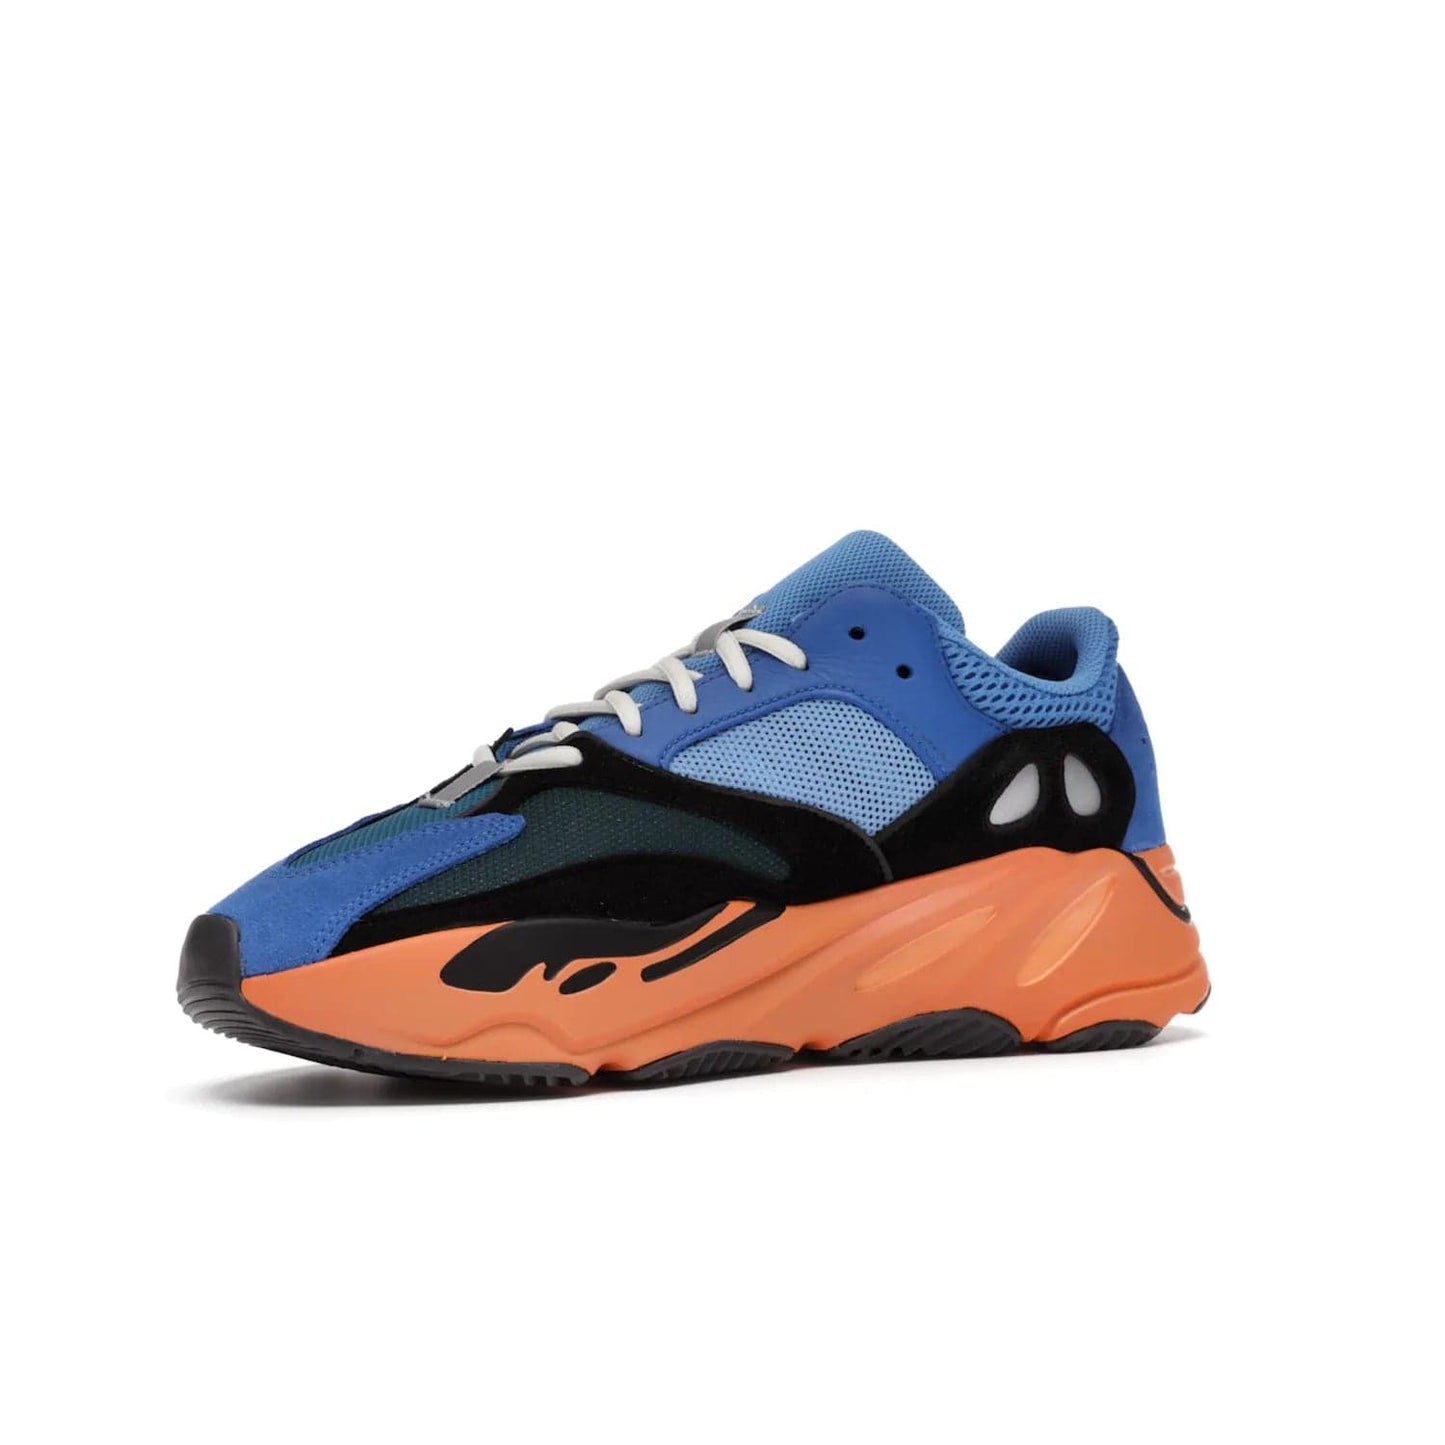 adidas Yeezy Boost 700 Bright Blue - Image 16 - Only at www.BallersClubKickz.com - Iconic sneaker style meets vibrant colour with the adidas Yeezy Boost 700 Bright Blue. Reflective accents, turquoise and teal panels, bright orange midsole and black outsole make for a bold release. April 2021.